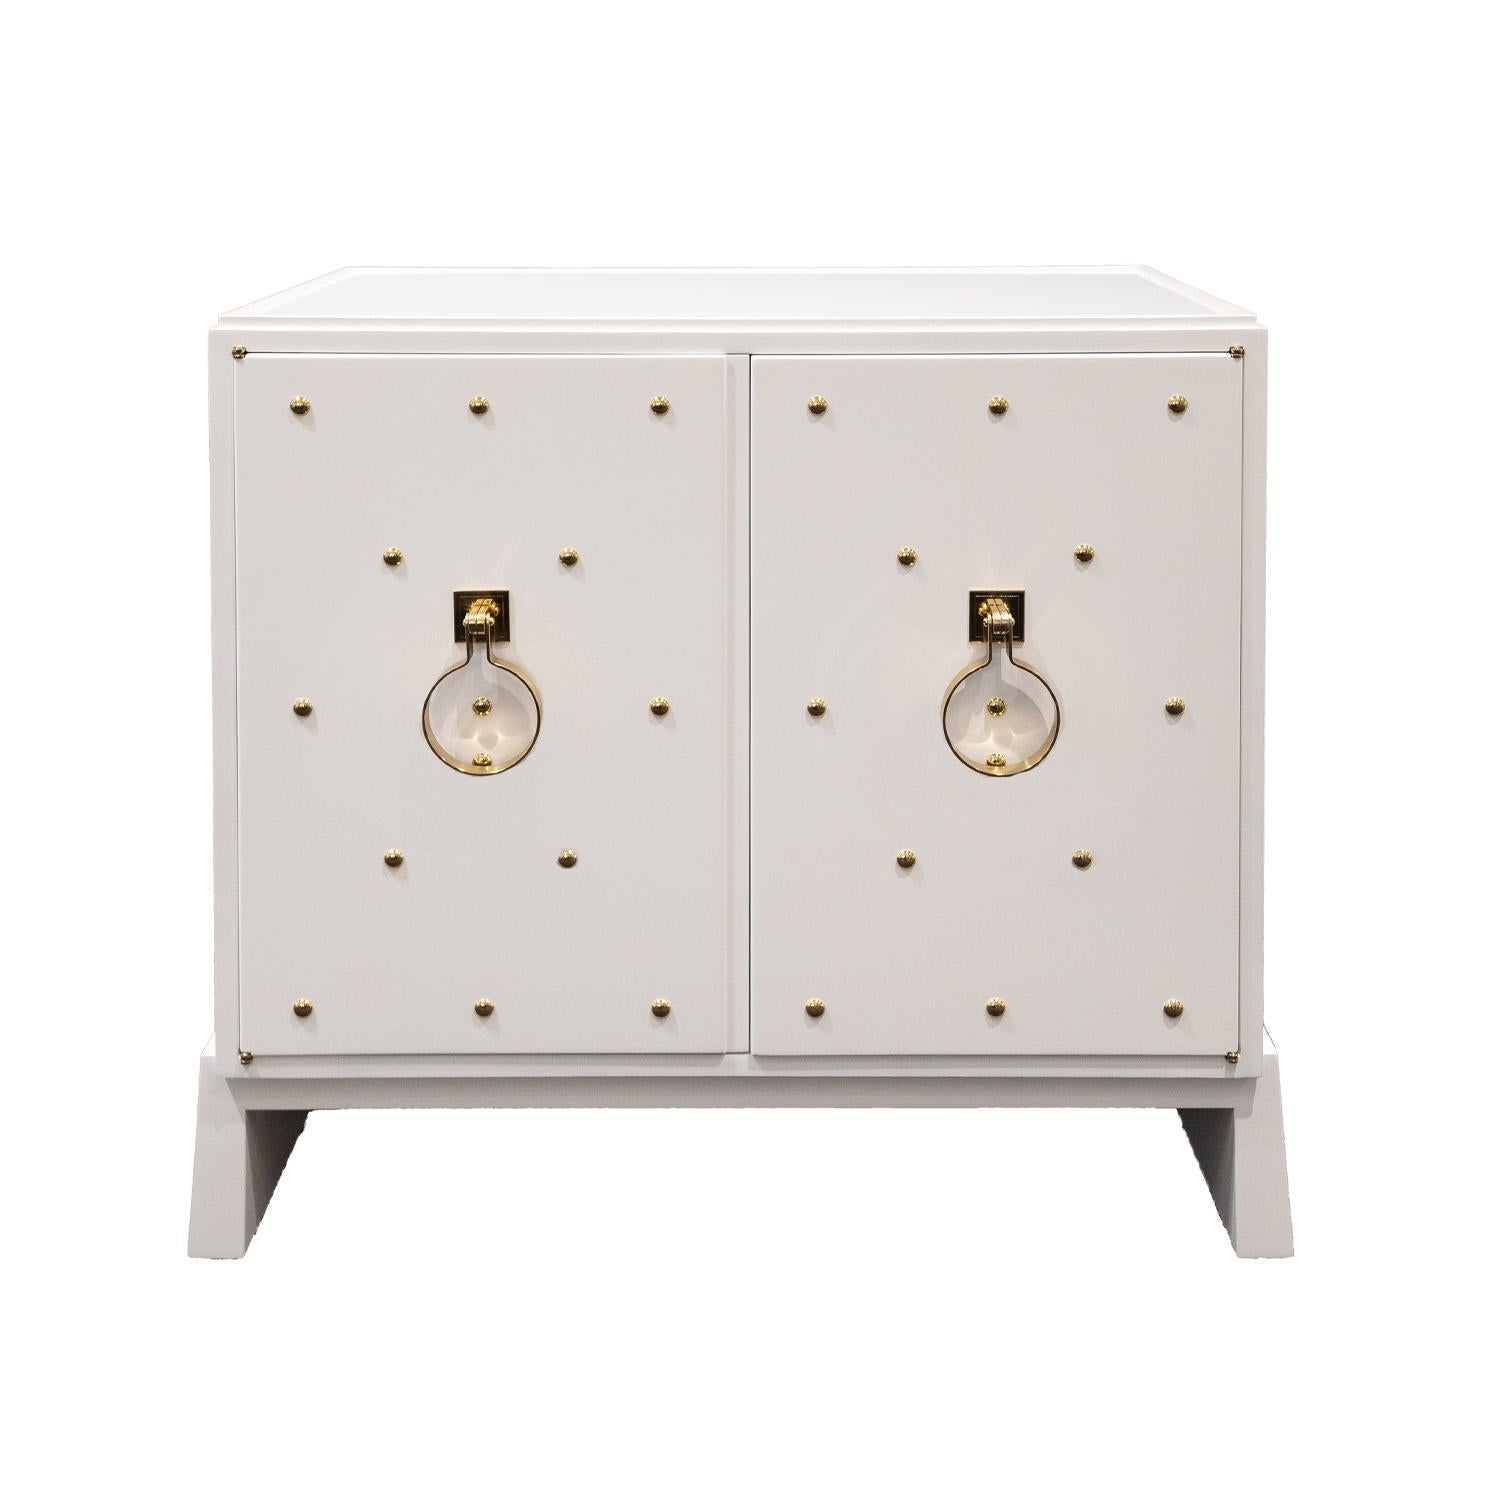 Iconic 2 door cabinet model 146 in white lacquer with brass studs, etched brass pulls, and inset milk glass top by Tommi Parzinger for Parzinger Originals 1950s (signed “Parzinger Originals” on inside of drawer). This beautiful cabinet exudes the